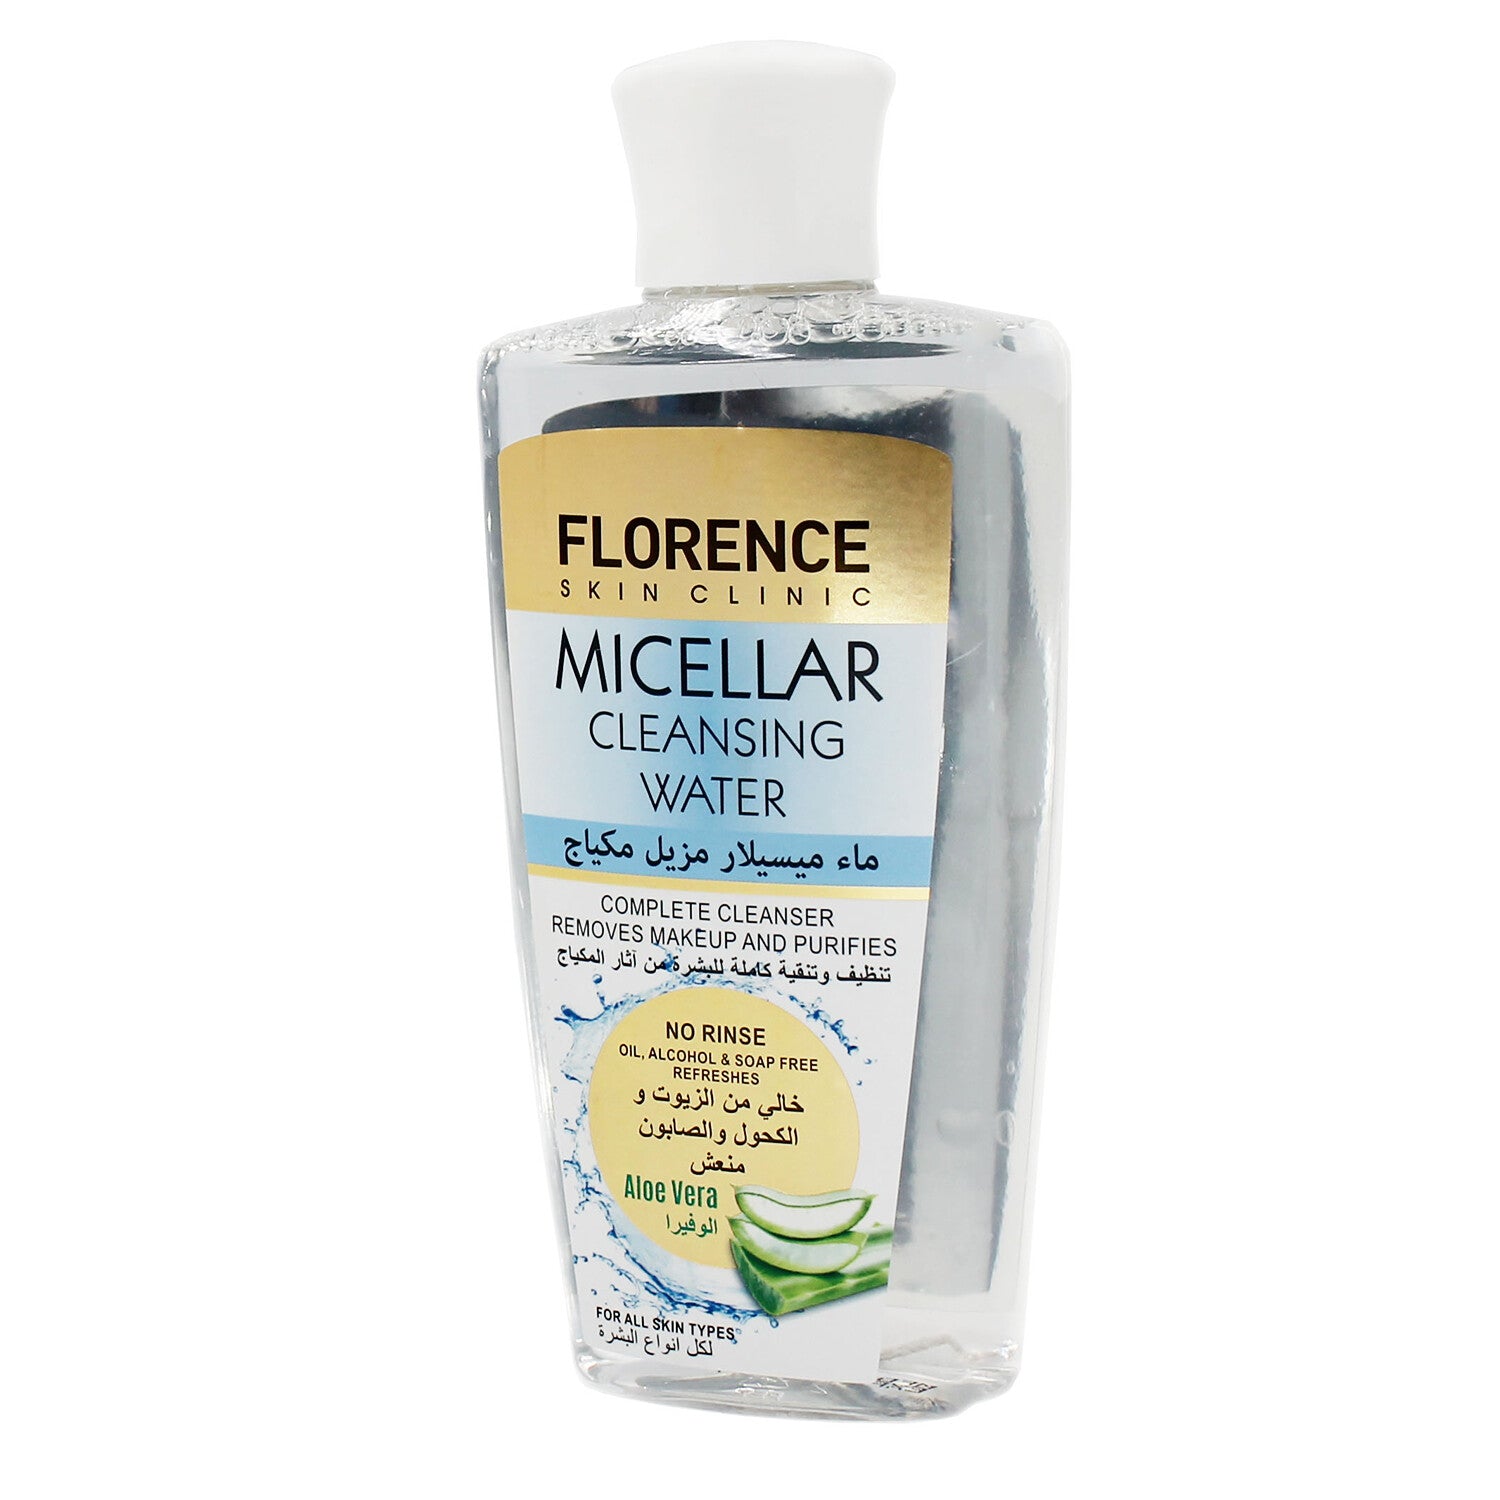 FLORENCE-Micellar Cleansing Water with Aloe Vera 200ml